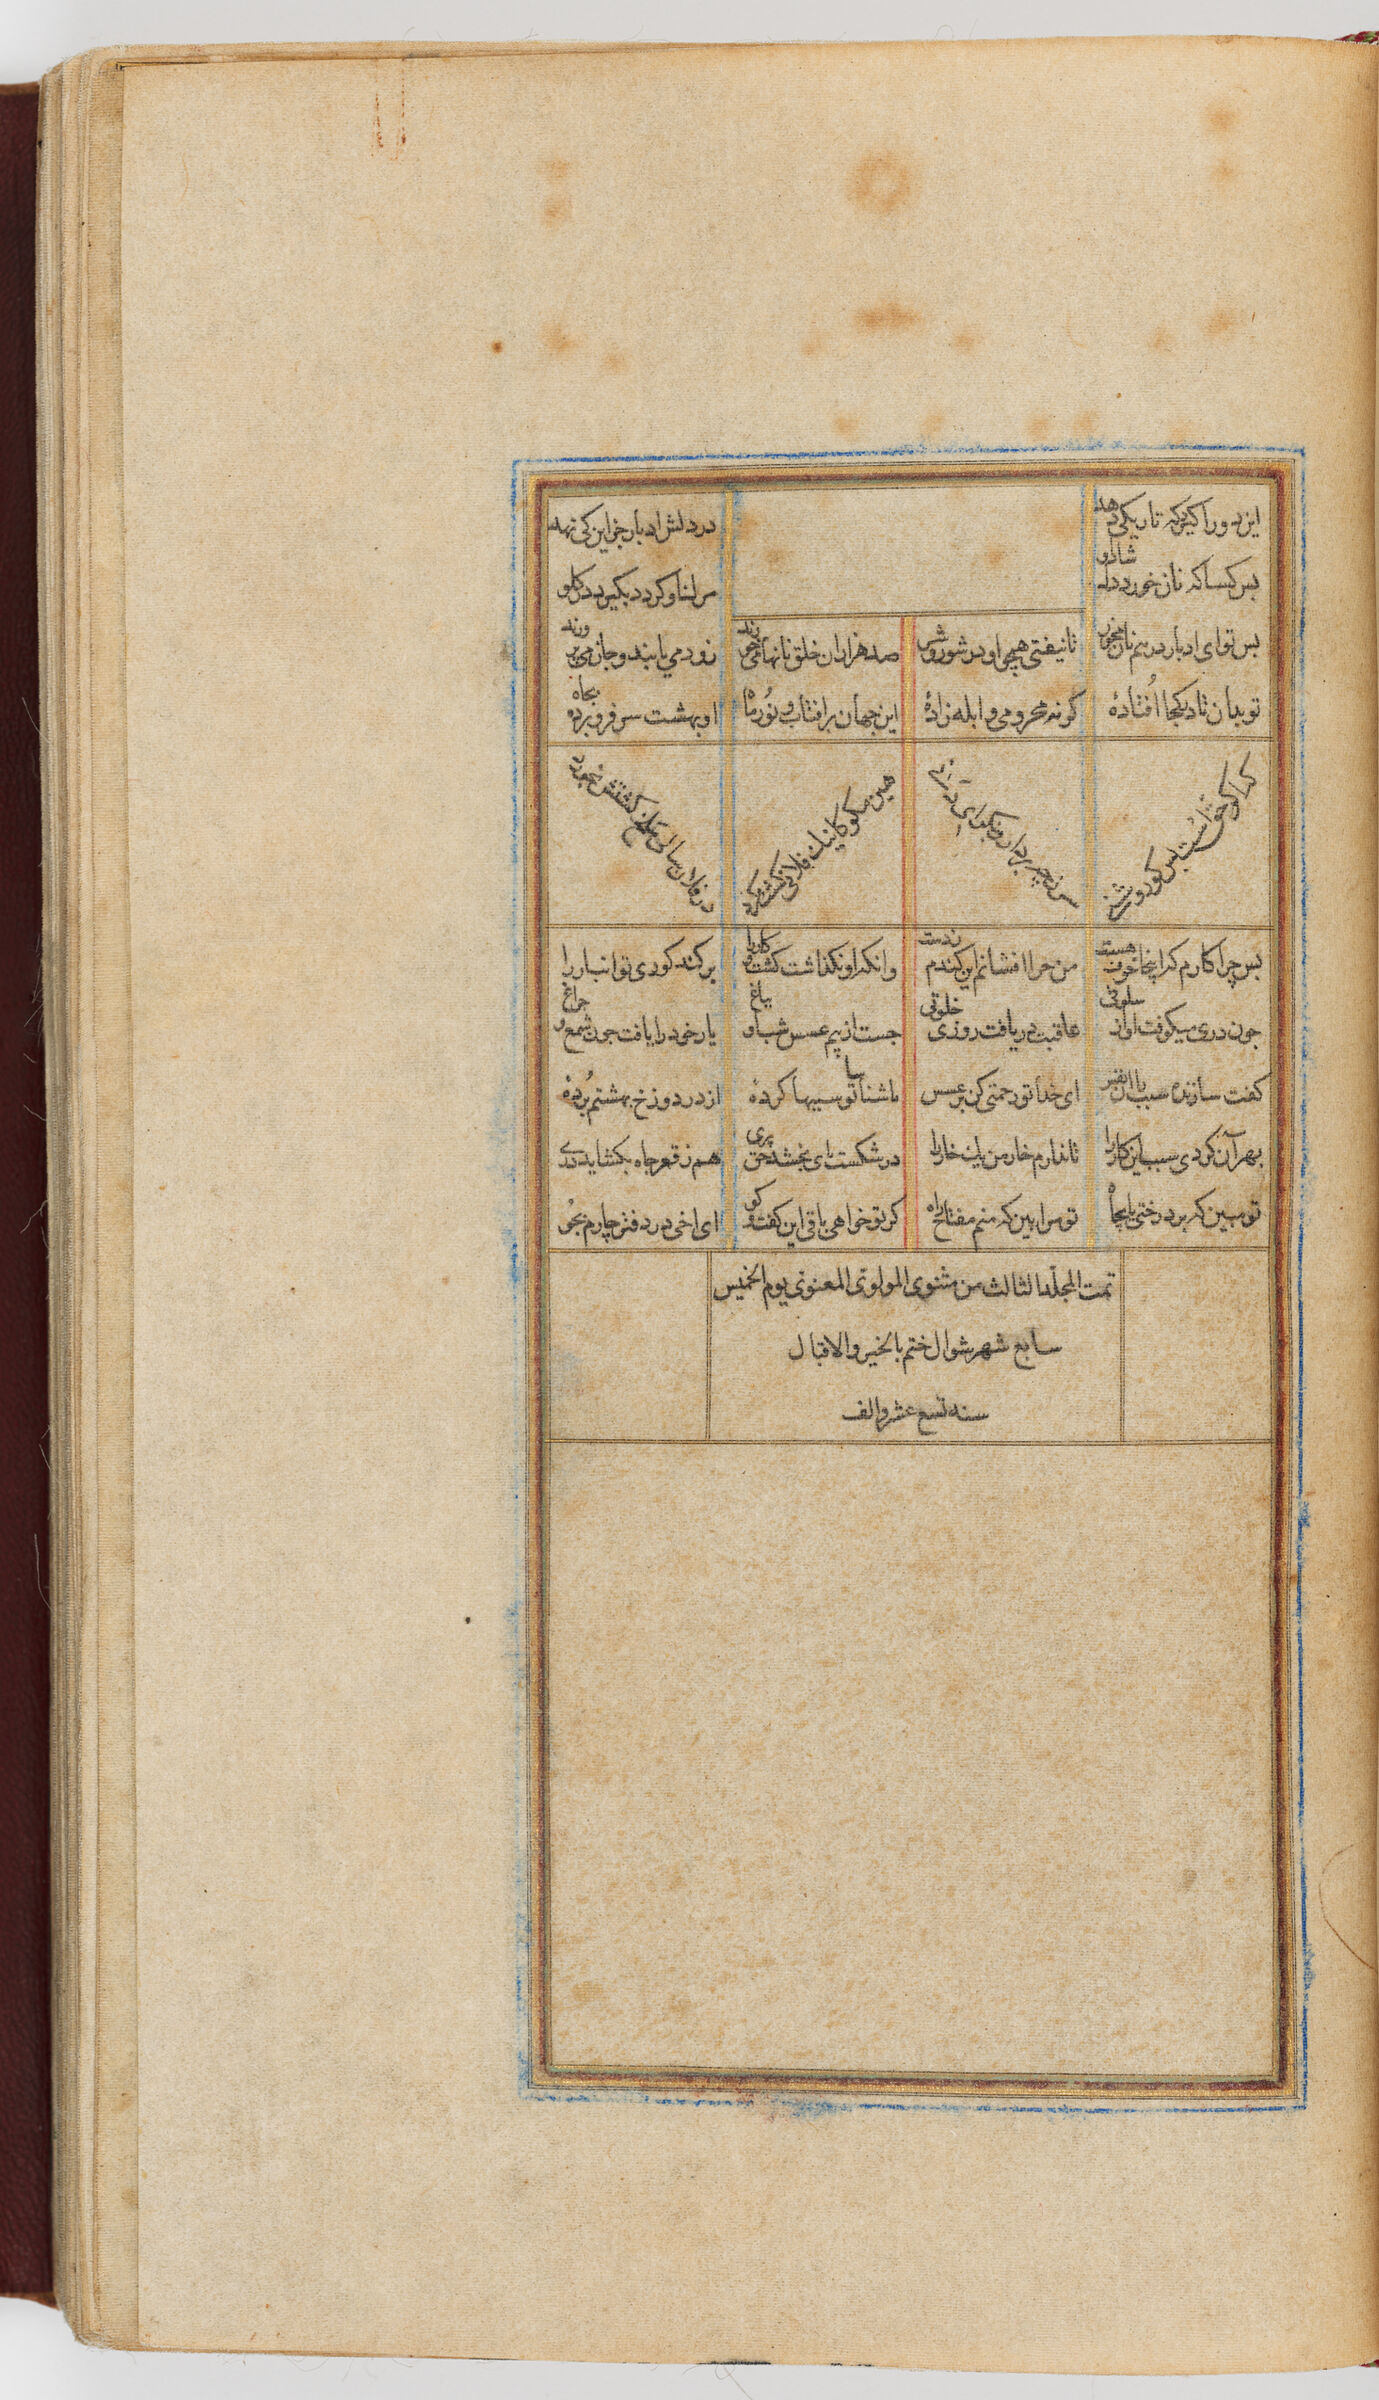 Colophon Of The Third Section (Colophon Recto; Blank Verso Of Folio 144), From A Manuscript Of The Mathnavi Ma‘navi By Maulana Jalal Al-Din Rumi